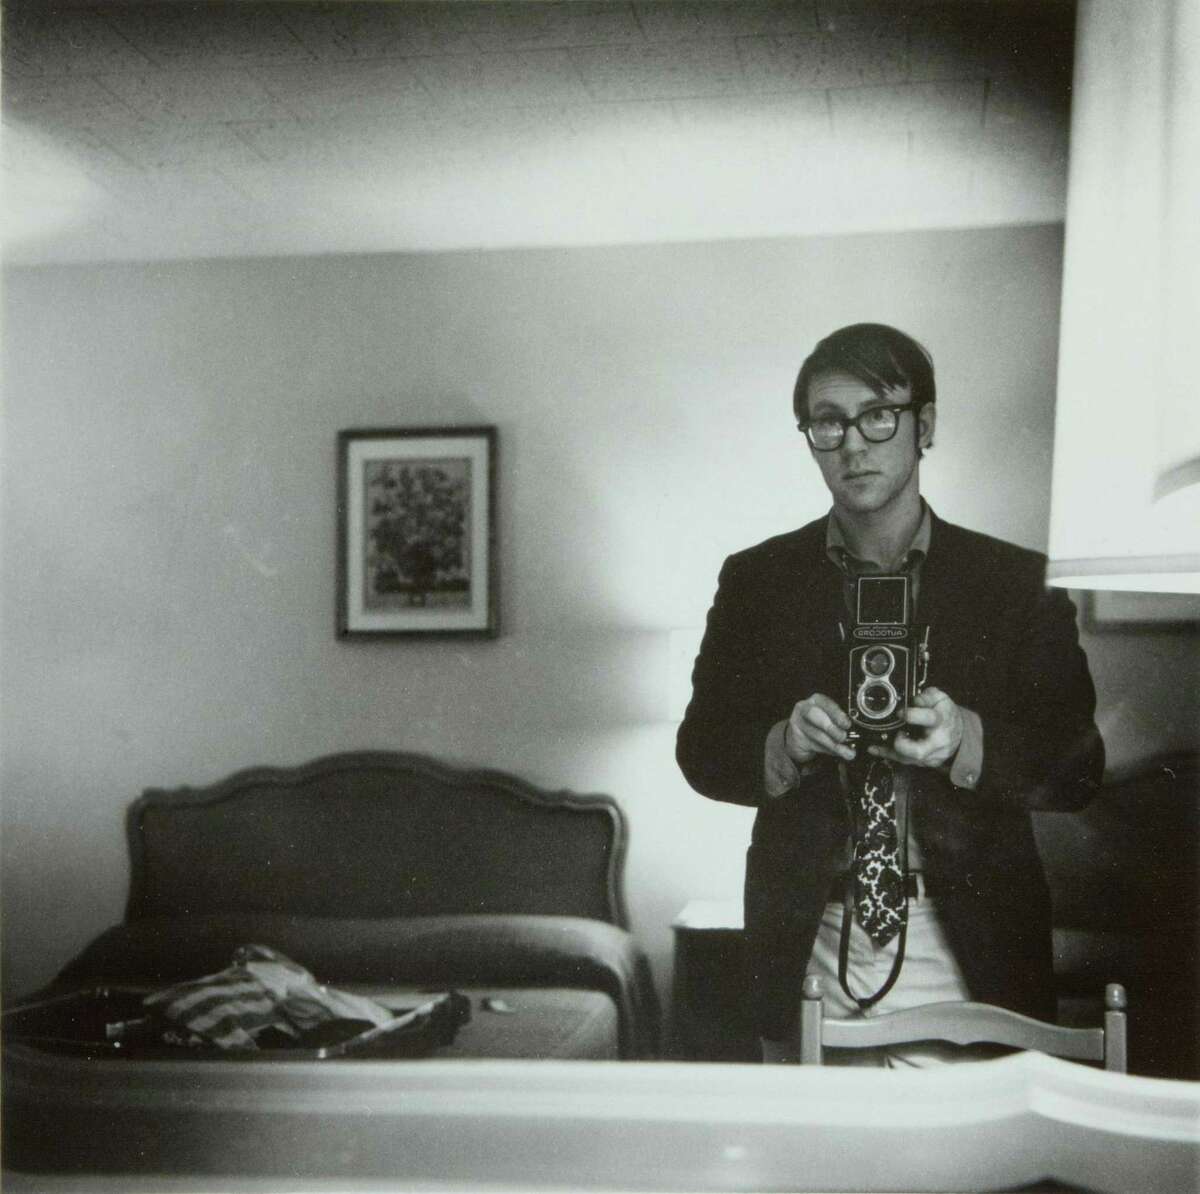 The Bruce Museum will open ‘In Time We Shall Know Ourselves,’an exhibition of black-and-white photographs by Raymond Smith, on Saturday. It will host a reception and artist talk on April 15 with the photographer, shown above in a self portrait.